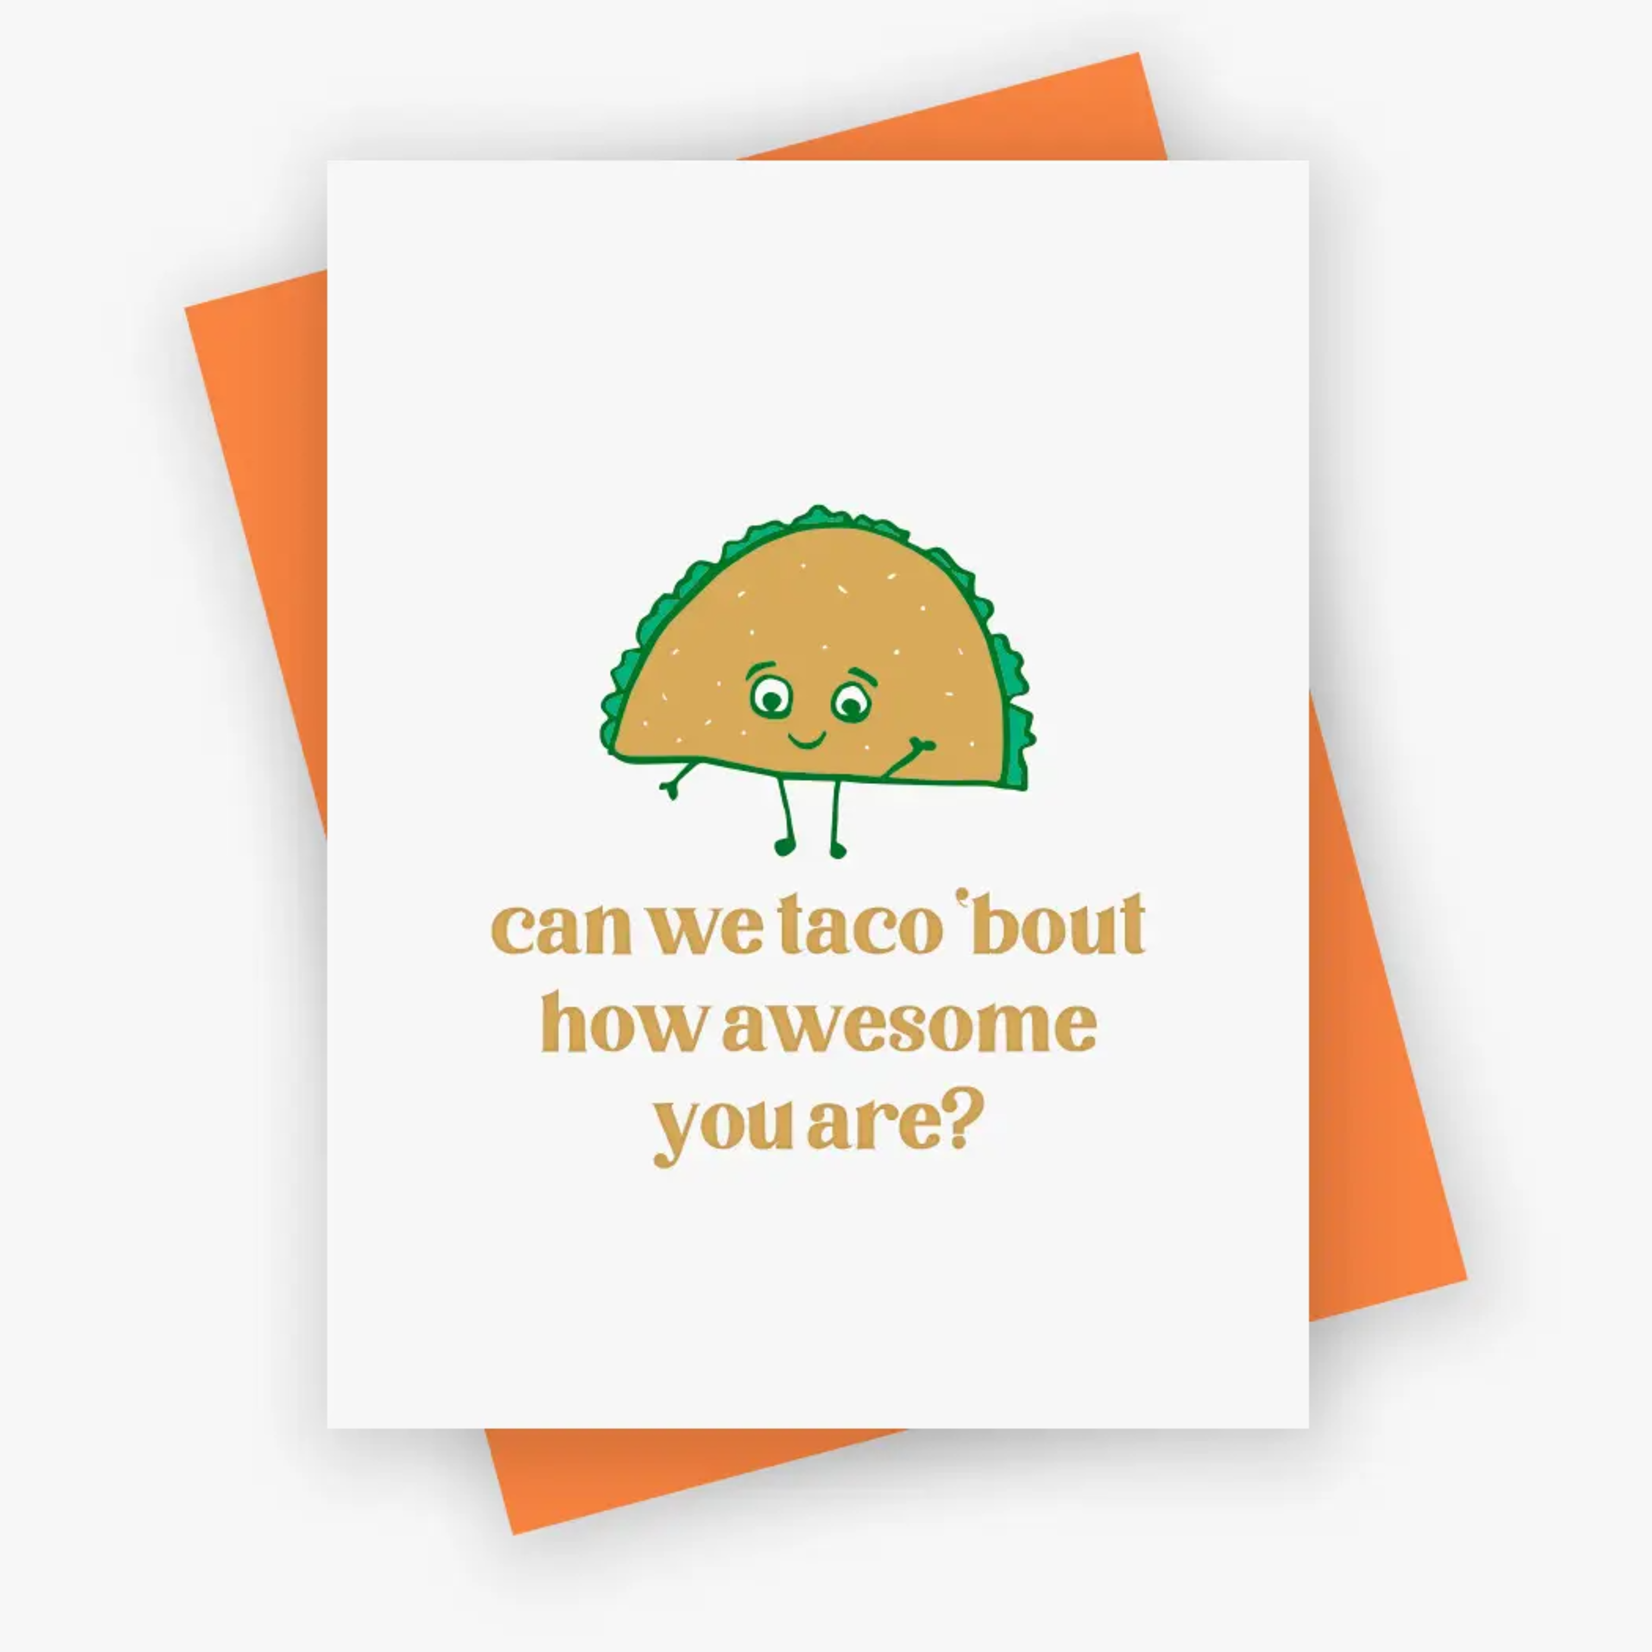 Iron Leaf Press Taco Bout How Awesome You Are Greeting Card